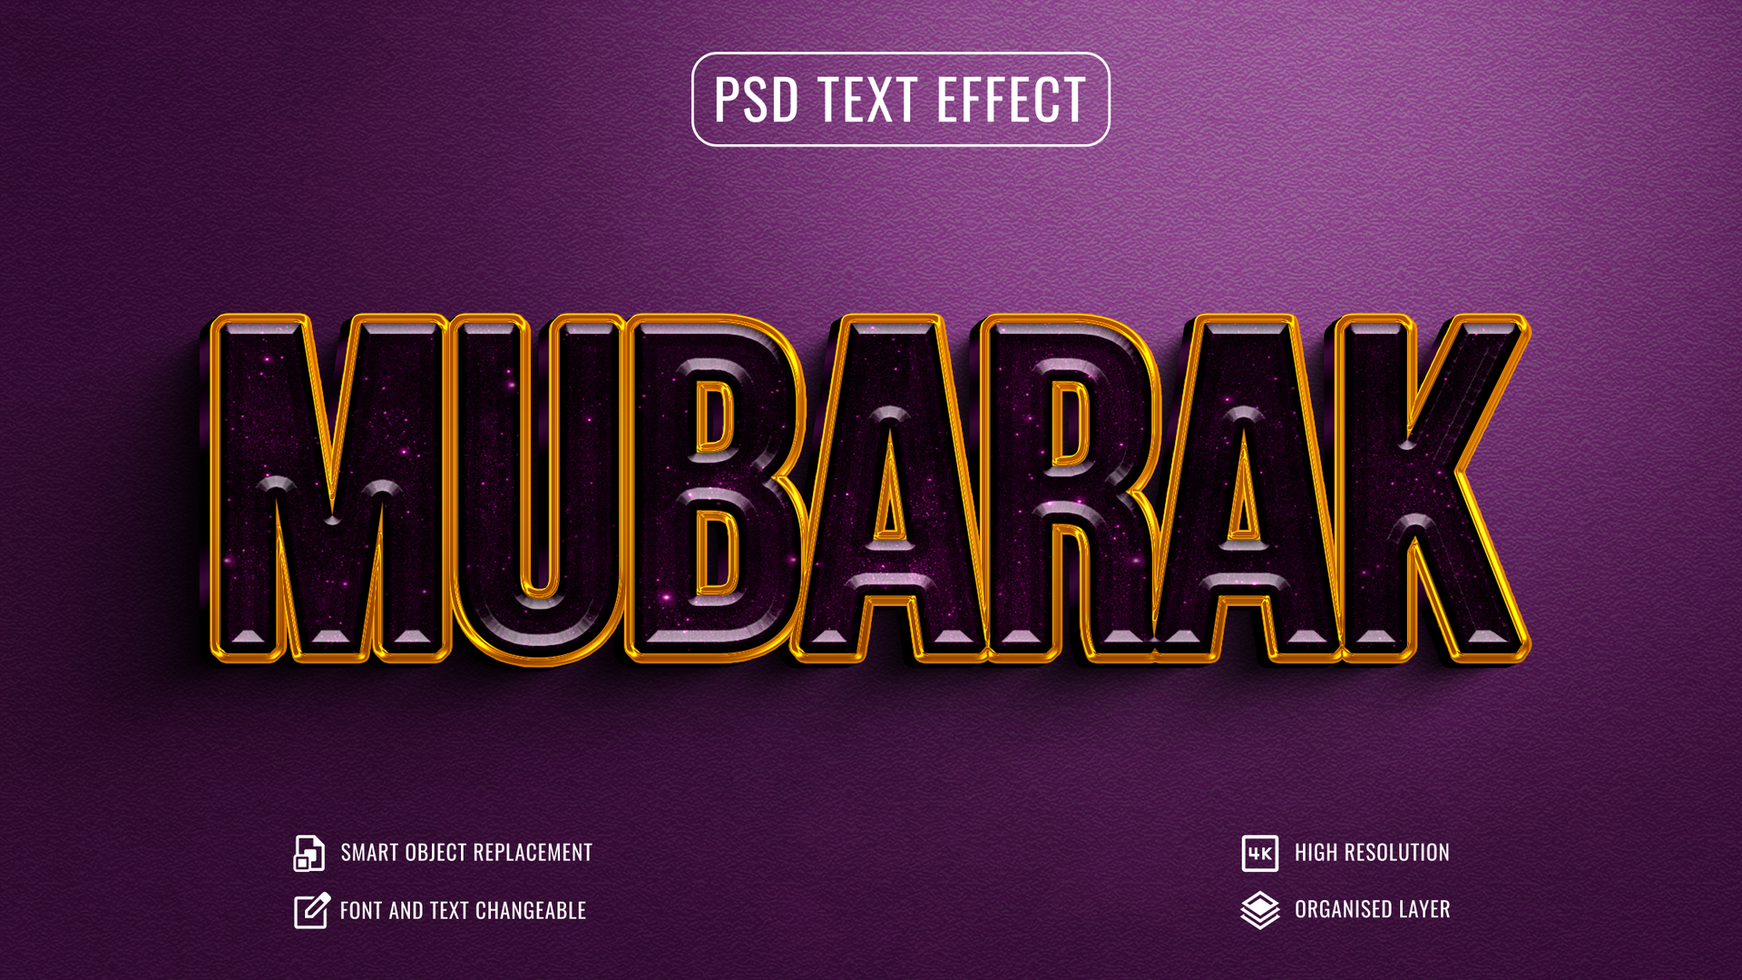 glossy gold and purple text effect for eid festival psd